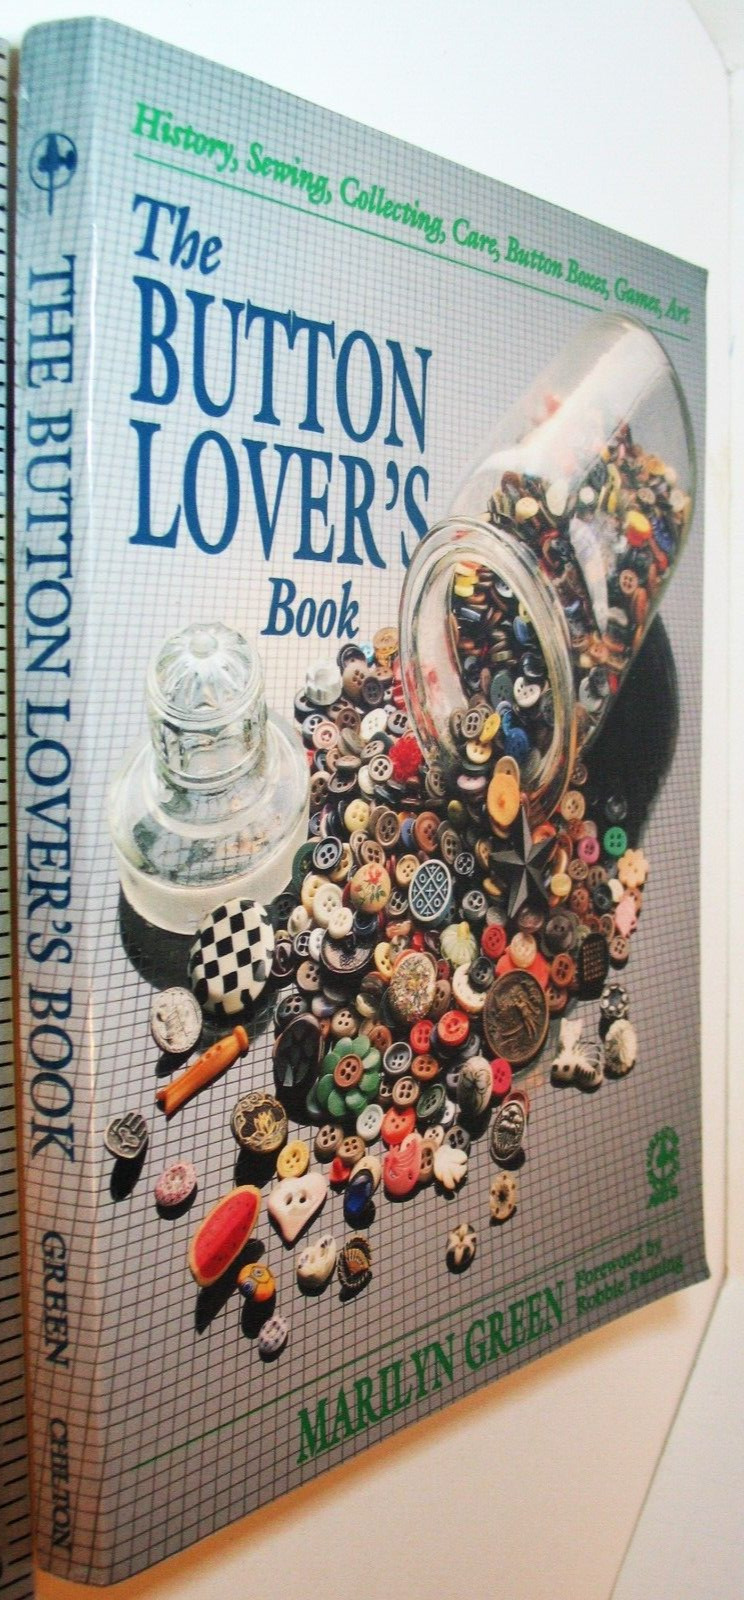 The Button Lover's Book by Marilyn Green 1991 Chilton Book Co. Softcover